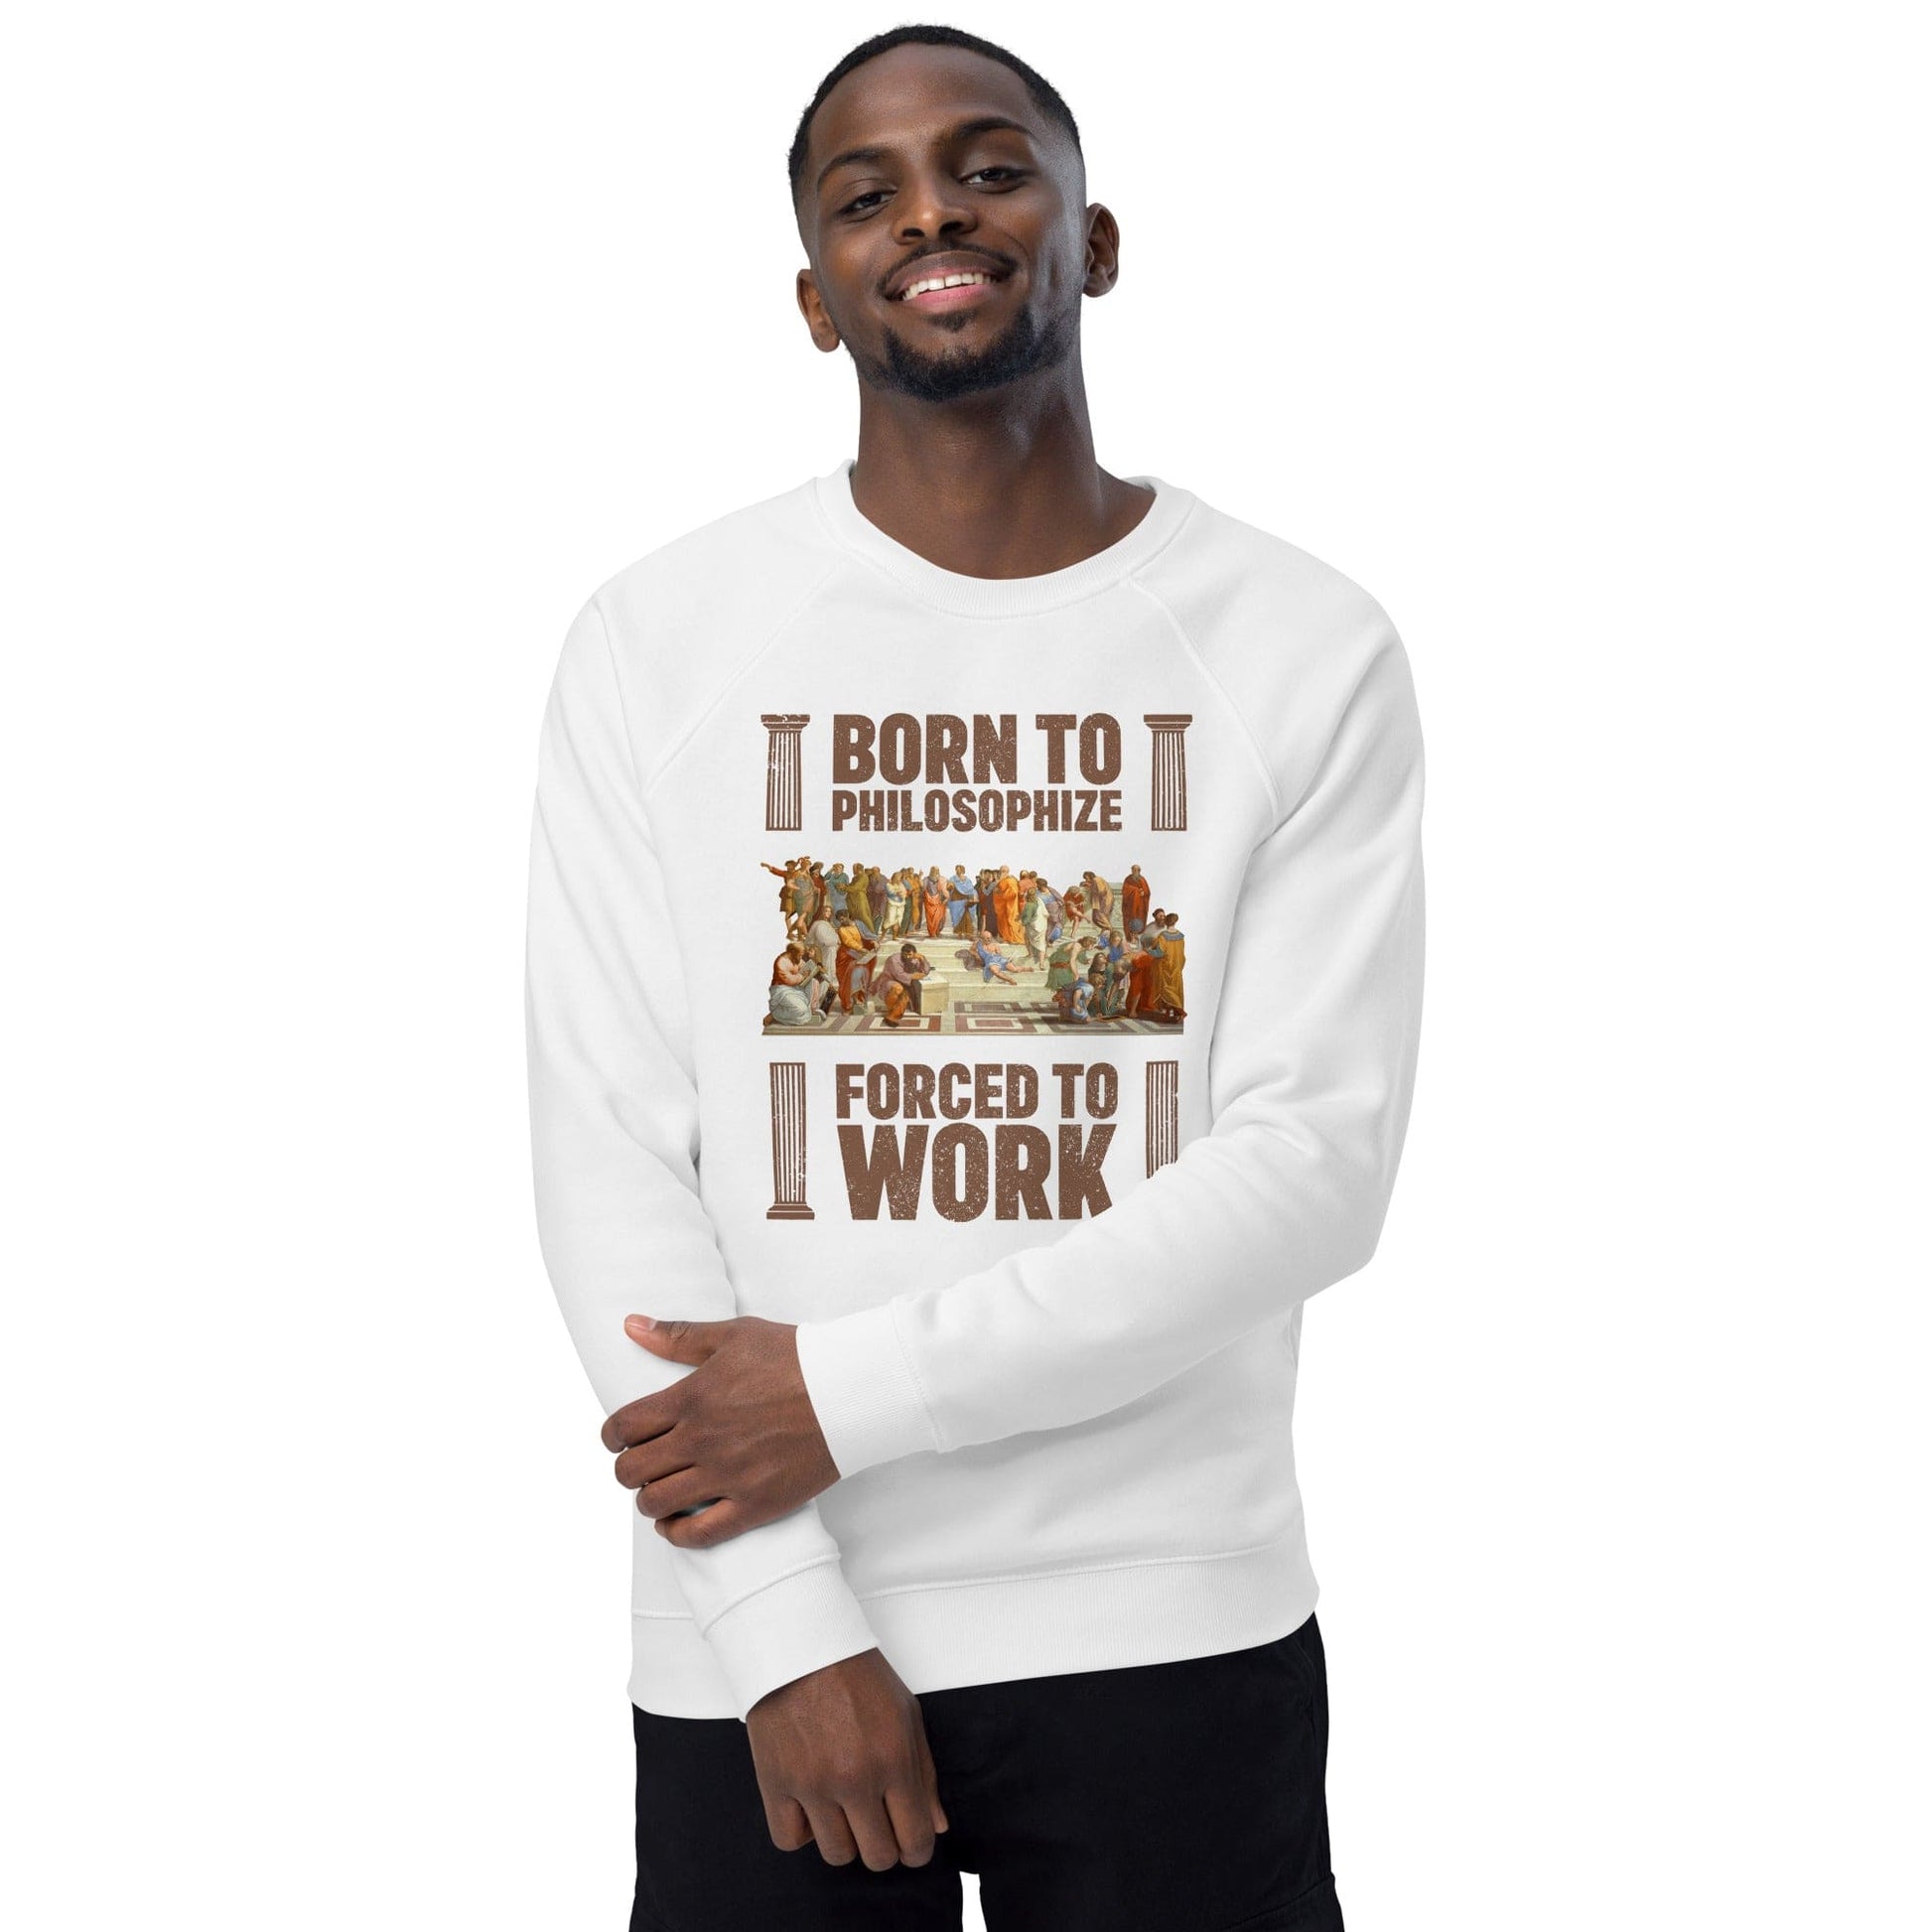 Born To Philosophize - Forced To Work (US) - Eco Sweatshirt